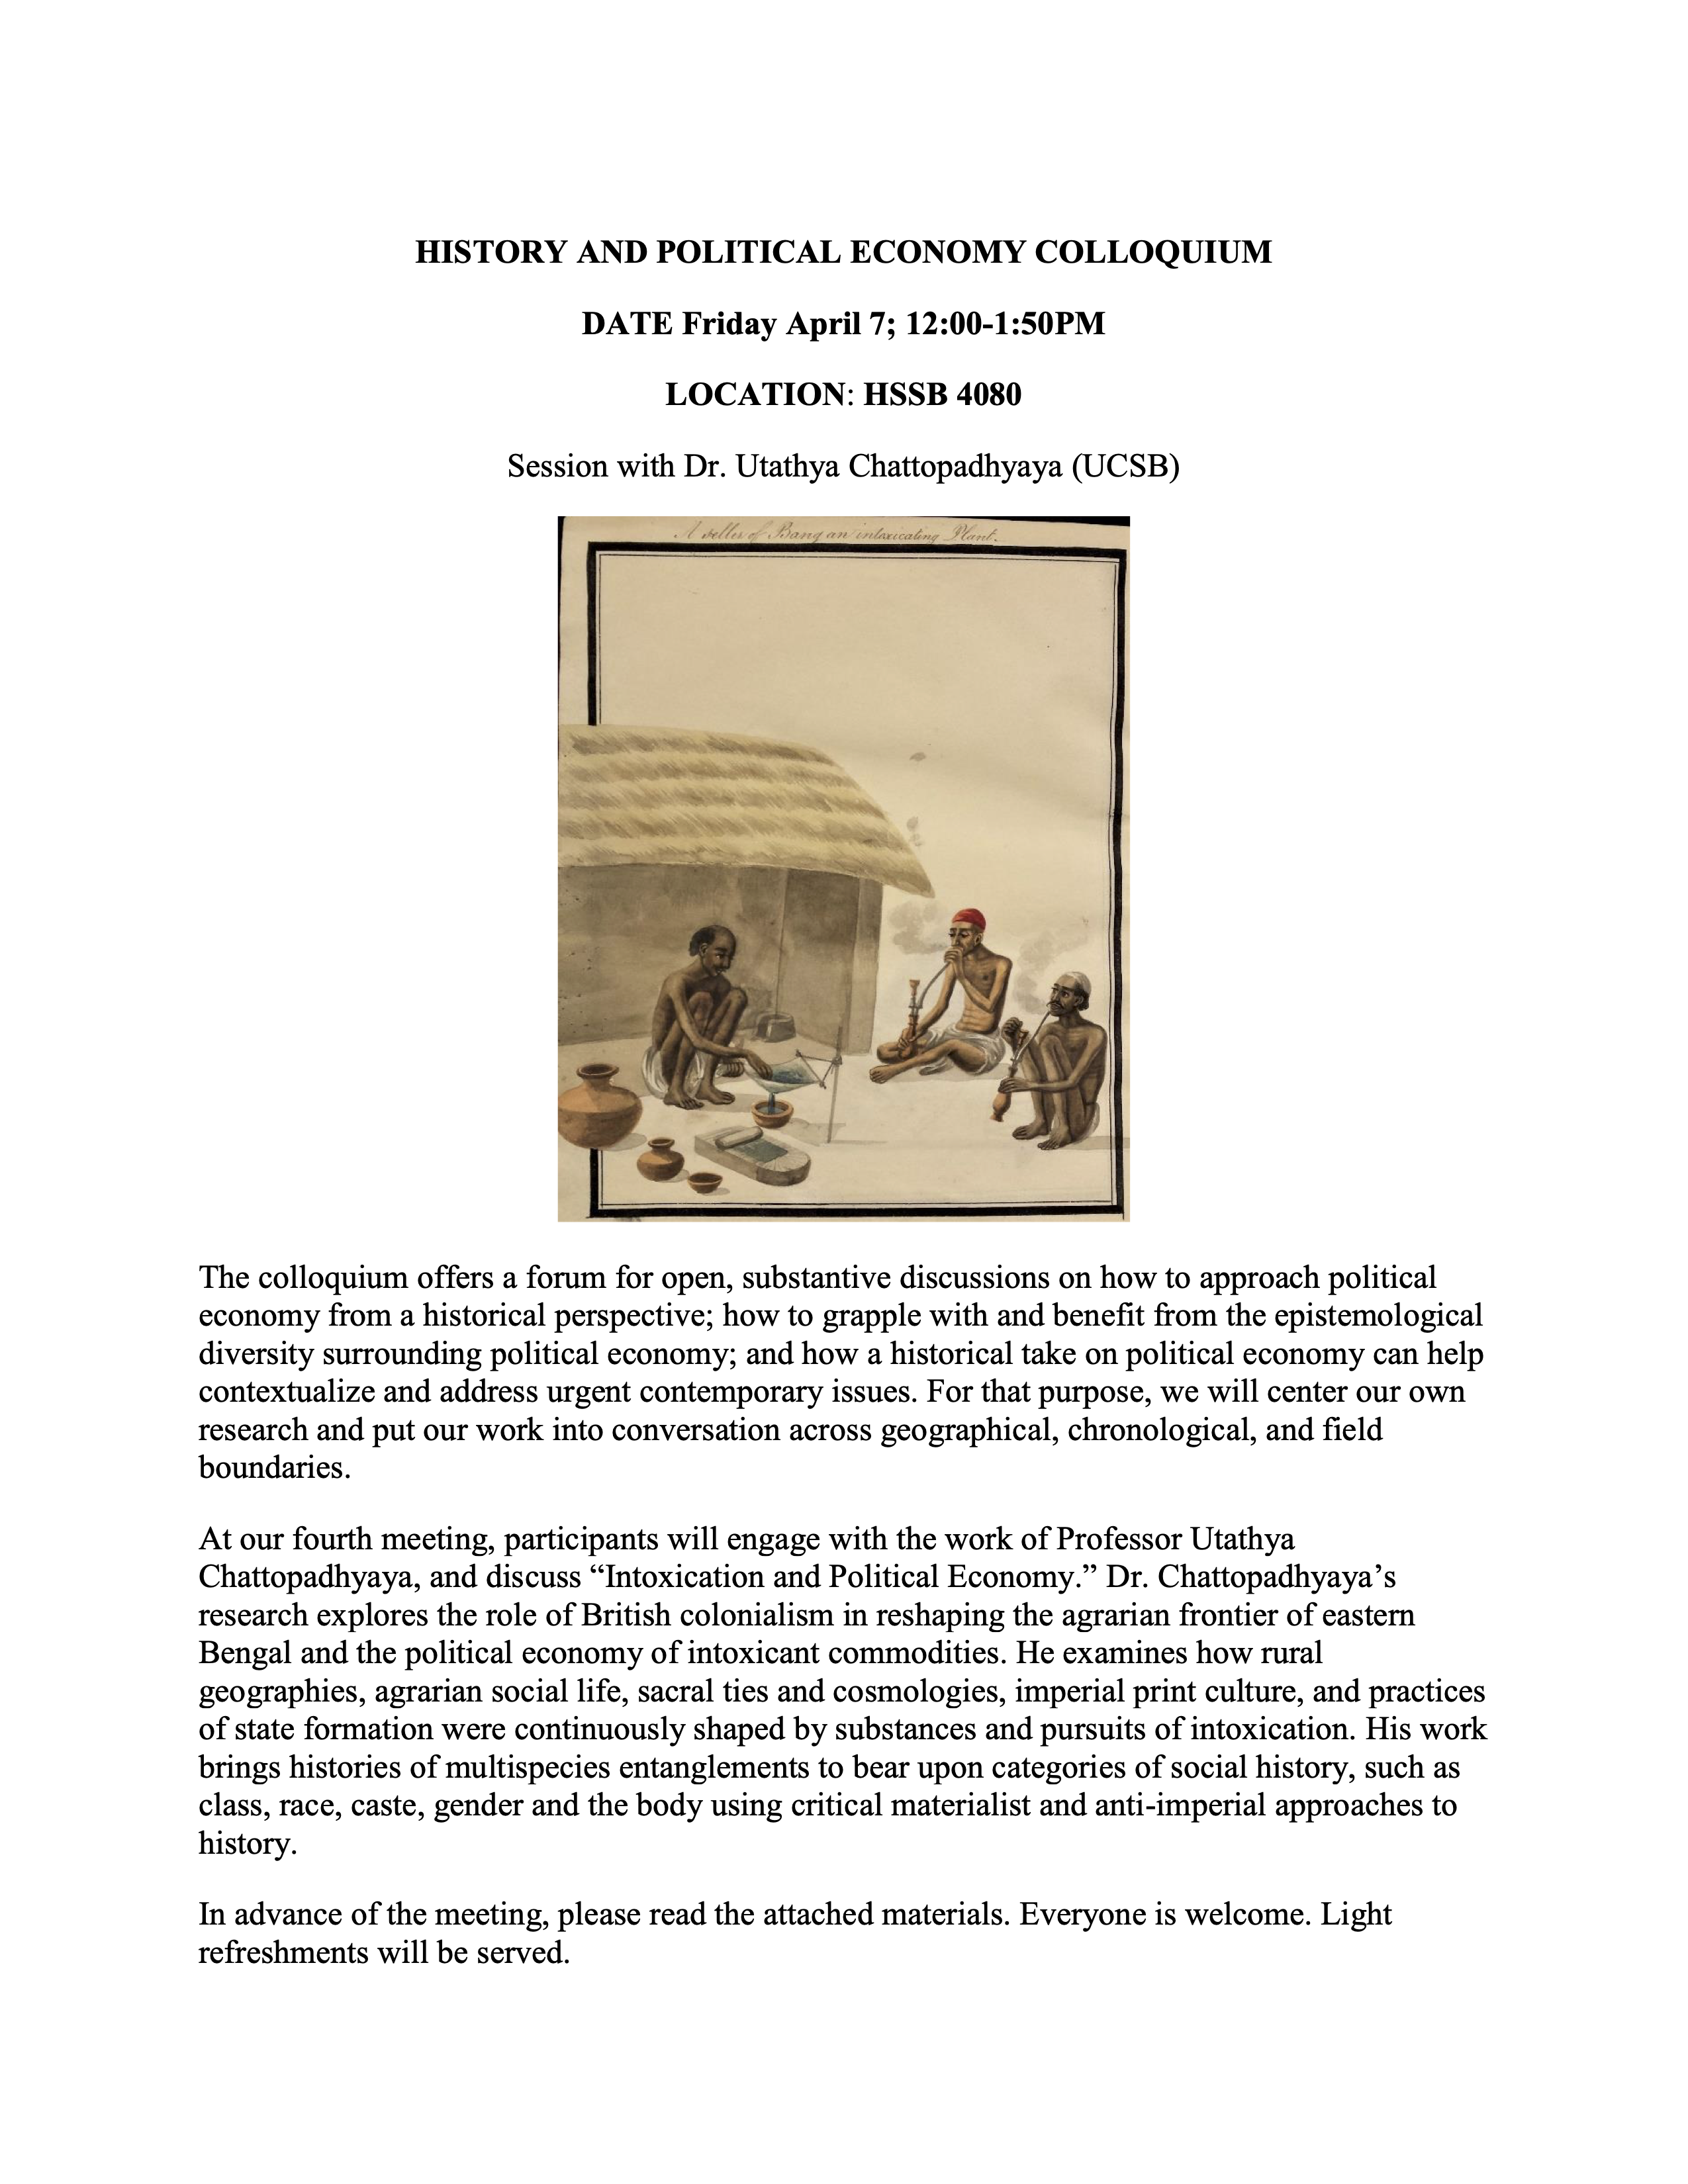 Flyer for "History and Political Economy Colloquium" on April 7 from 12-1:50PM in HSSB 4080